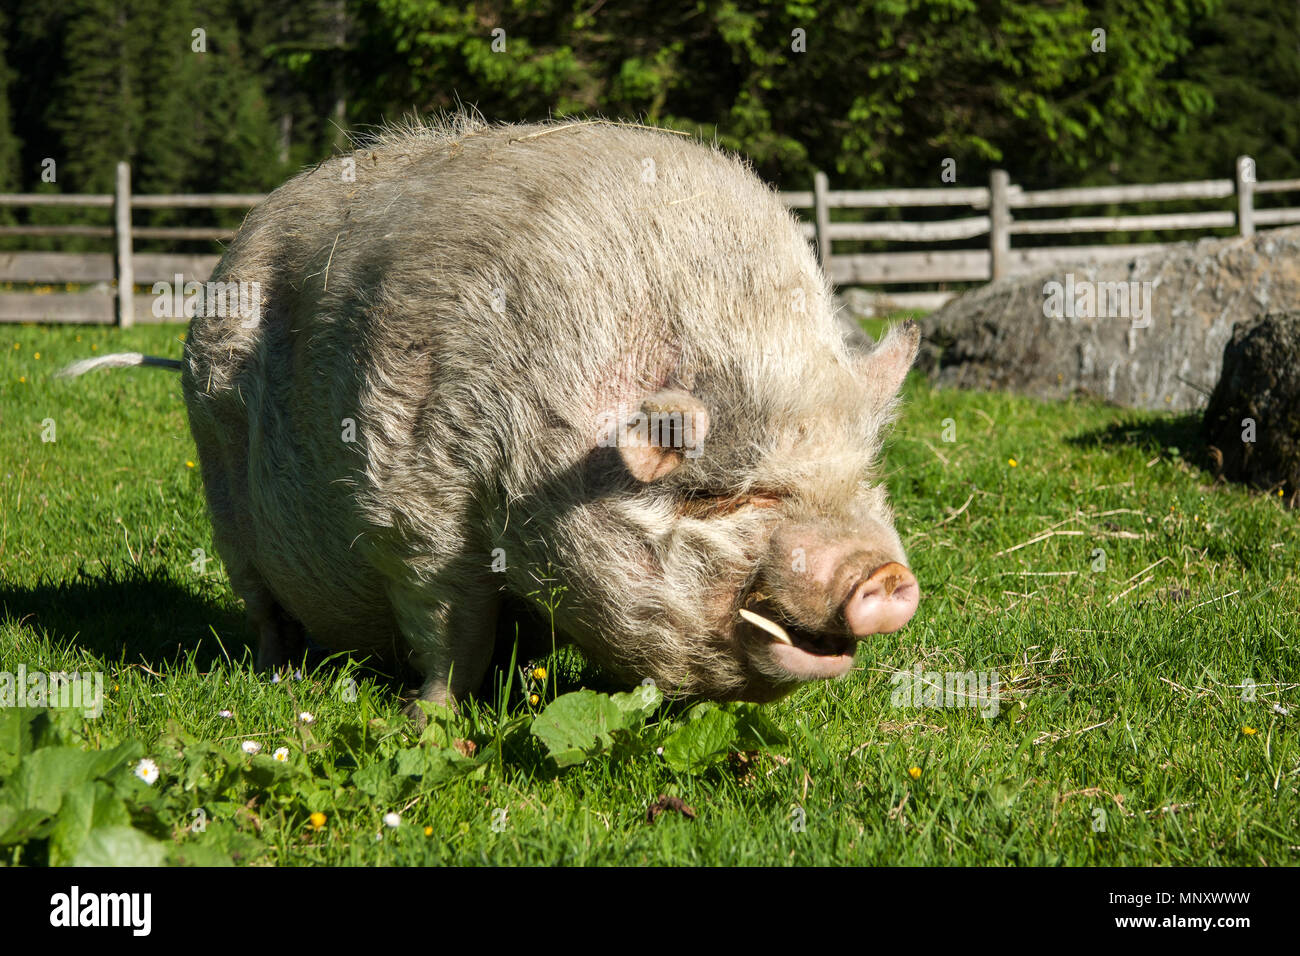 white fat pig walking on green grass outdoor in the sun Stock Photo